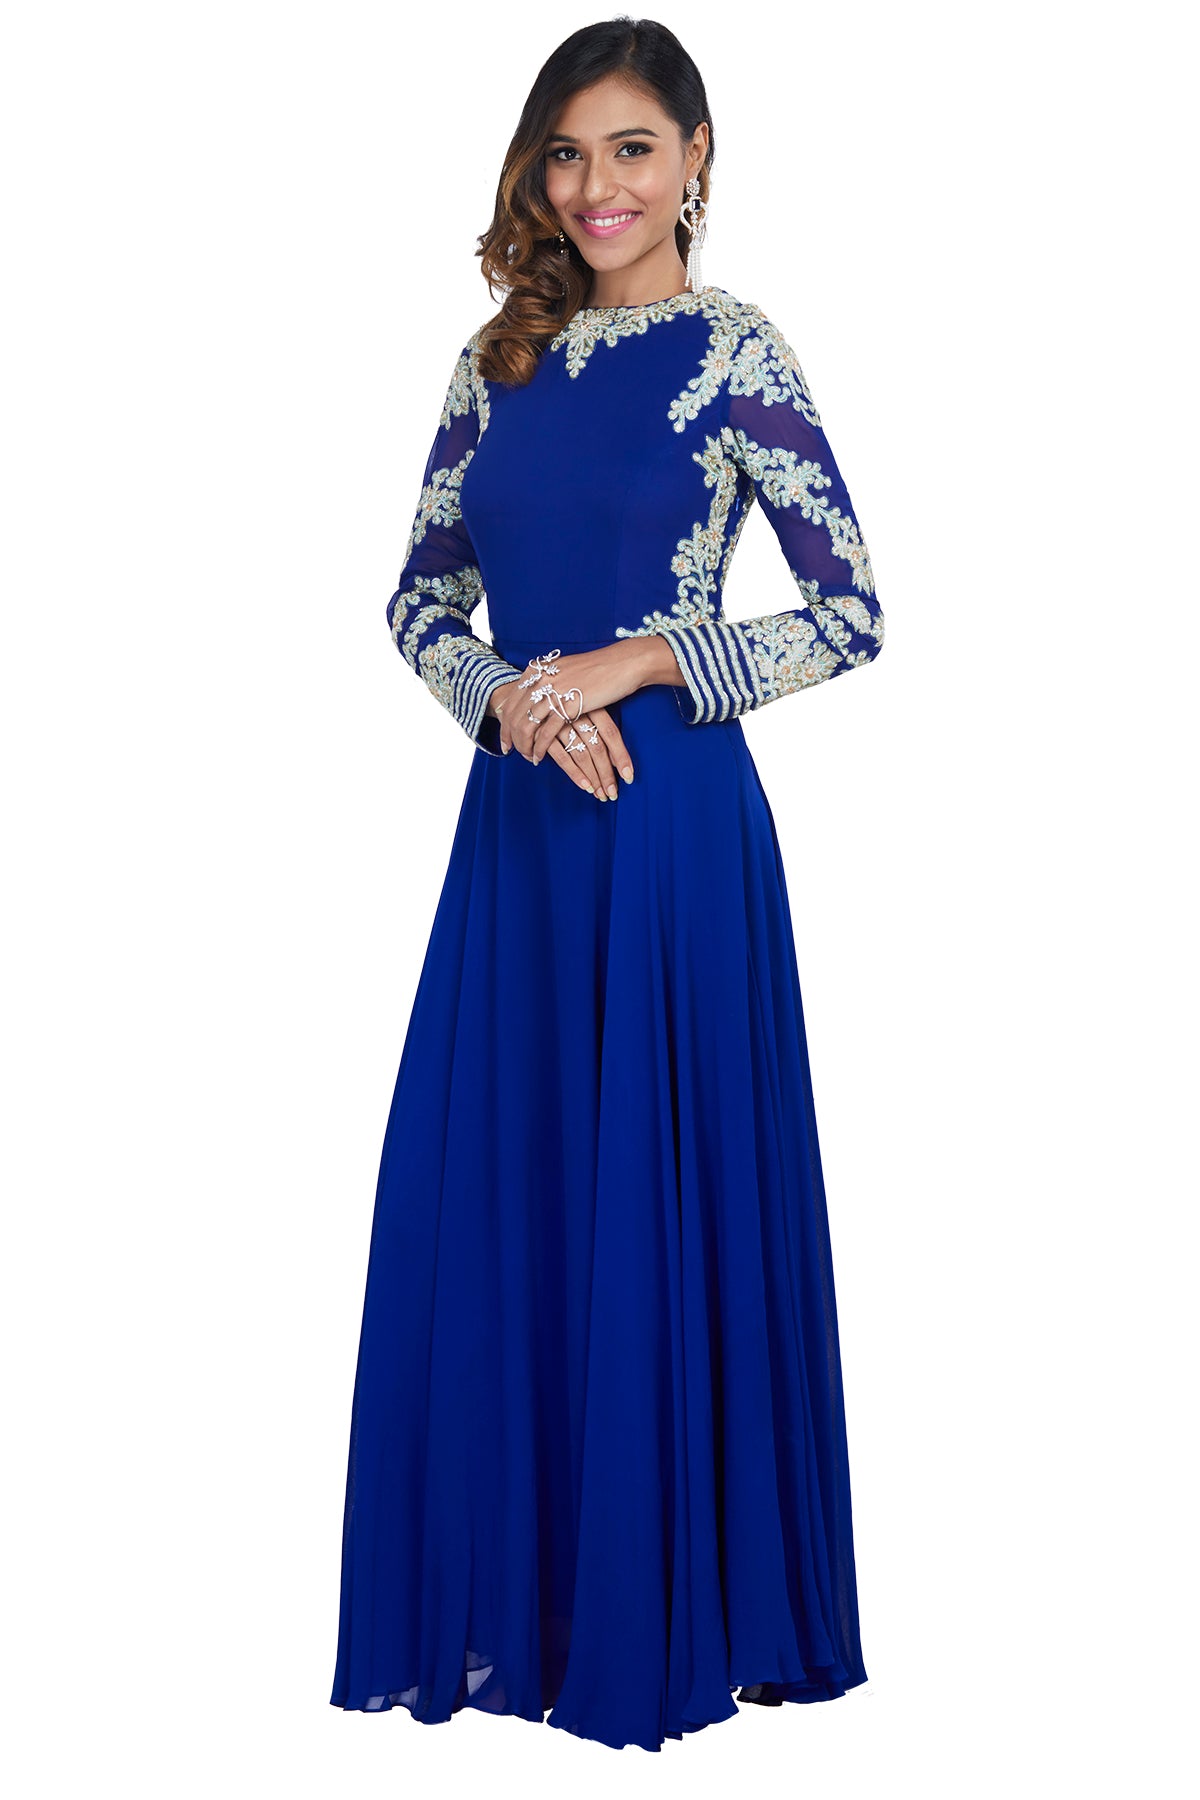 Be the mesmerising vision of majesty in this royal blue georgette gown with a boat neck and fully embroidered sleeves in white & mint green threadwork.
